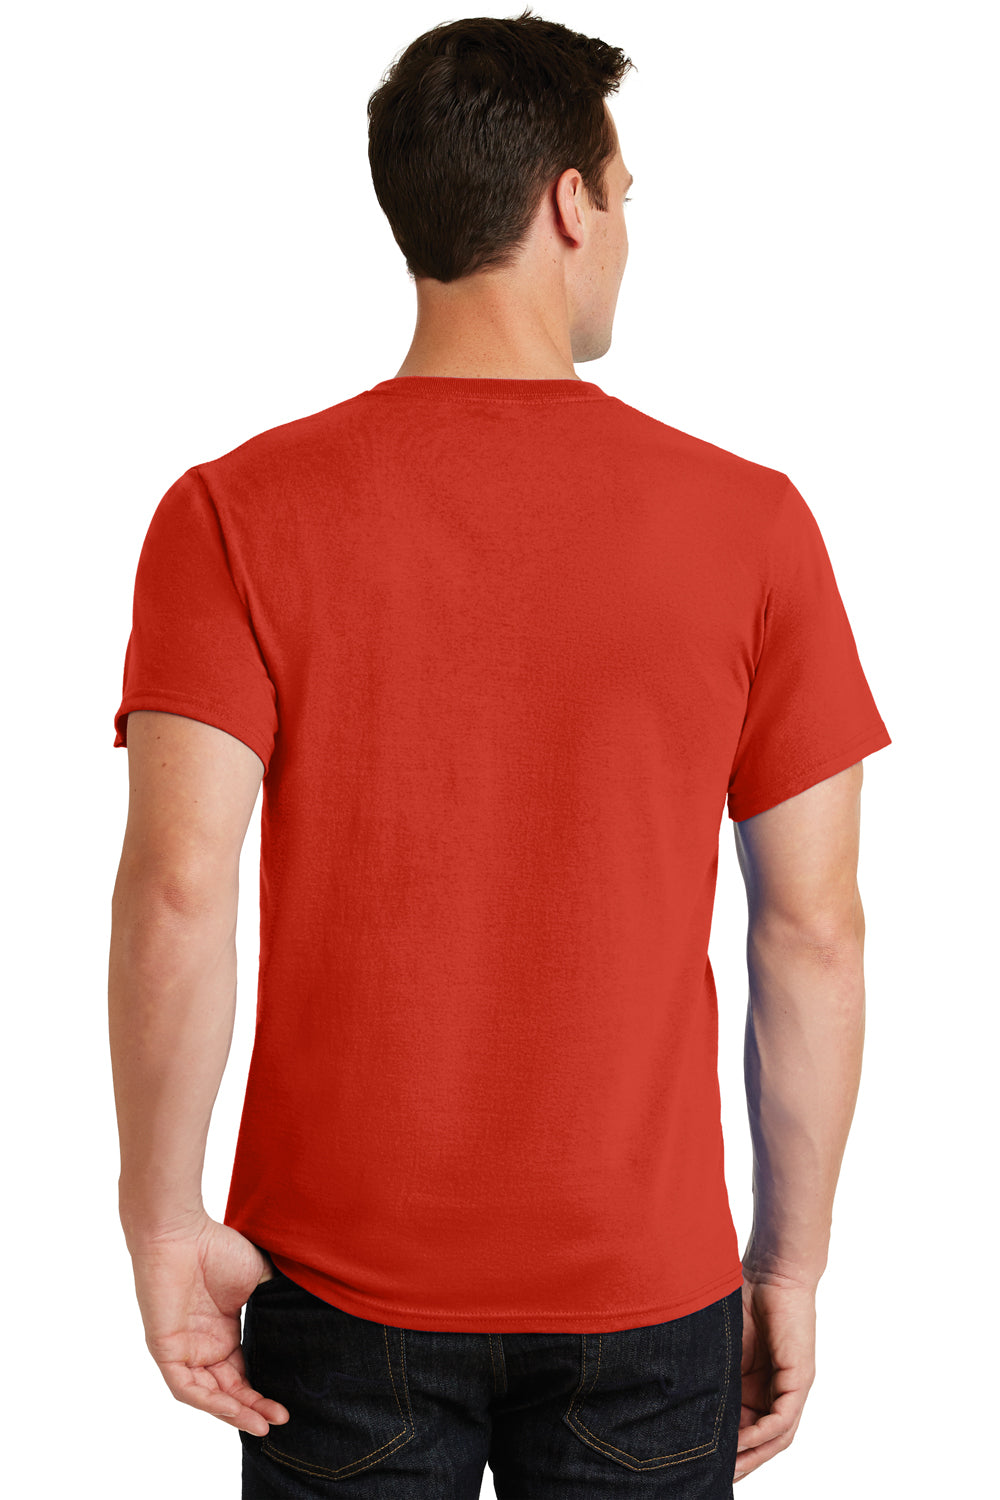 Port & Company PC61 Mens Essential Short Sleeve Crewneck T-Shirt Fiery Red Back